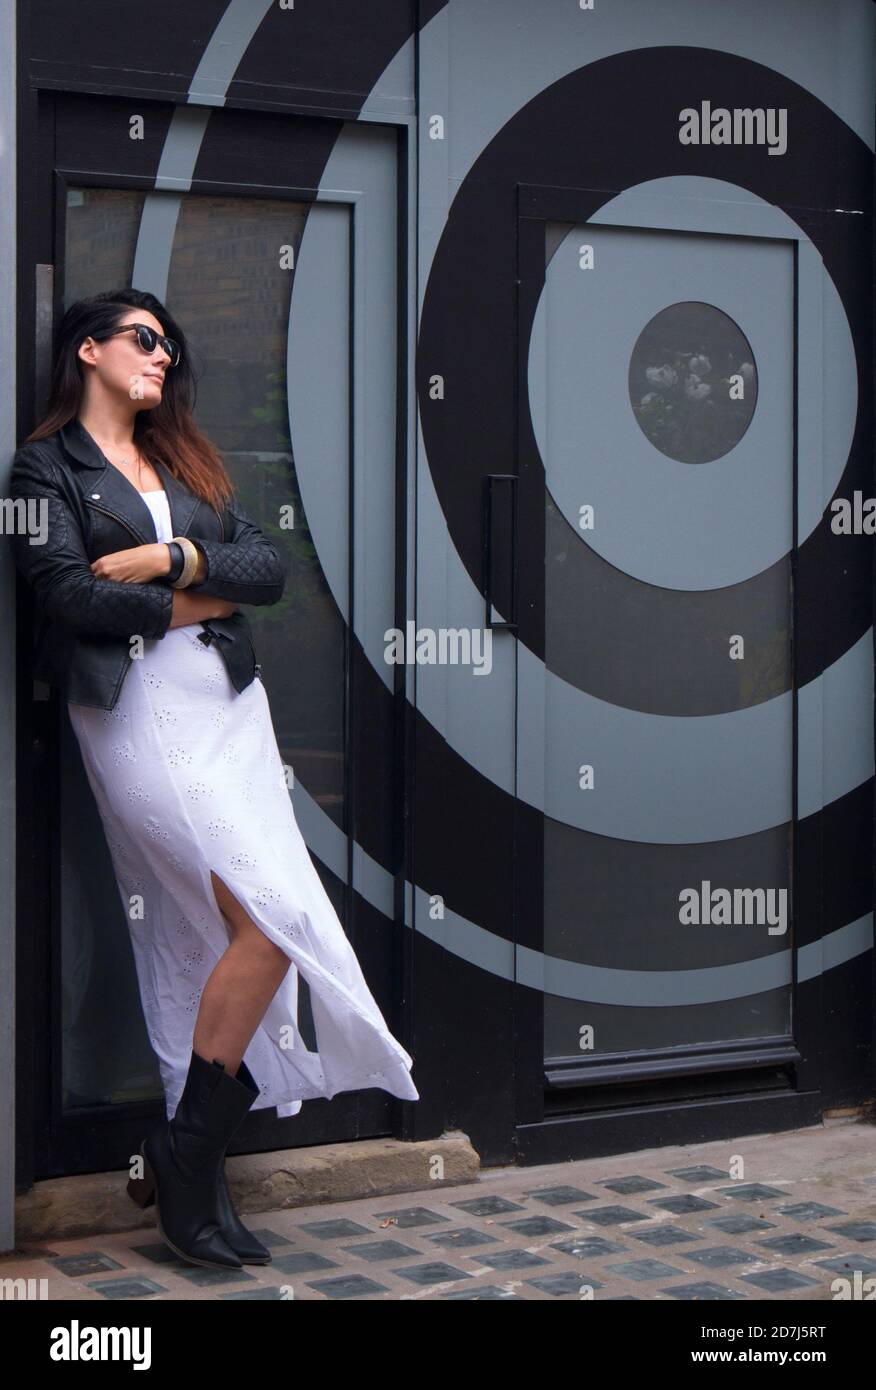 Stylish woman standing in front of circular graphic design Stock Photo